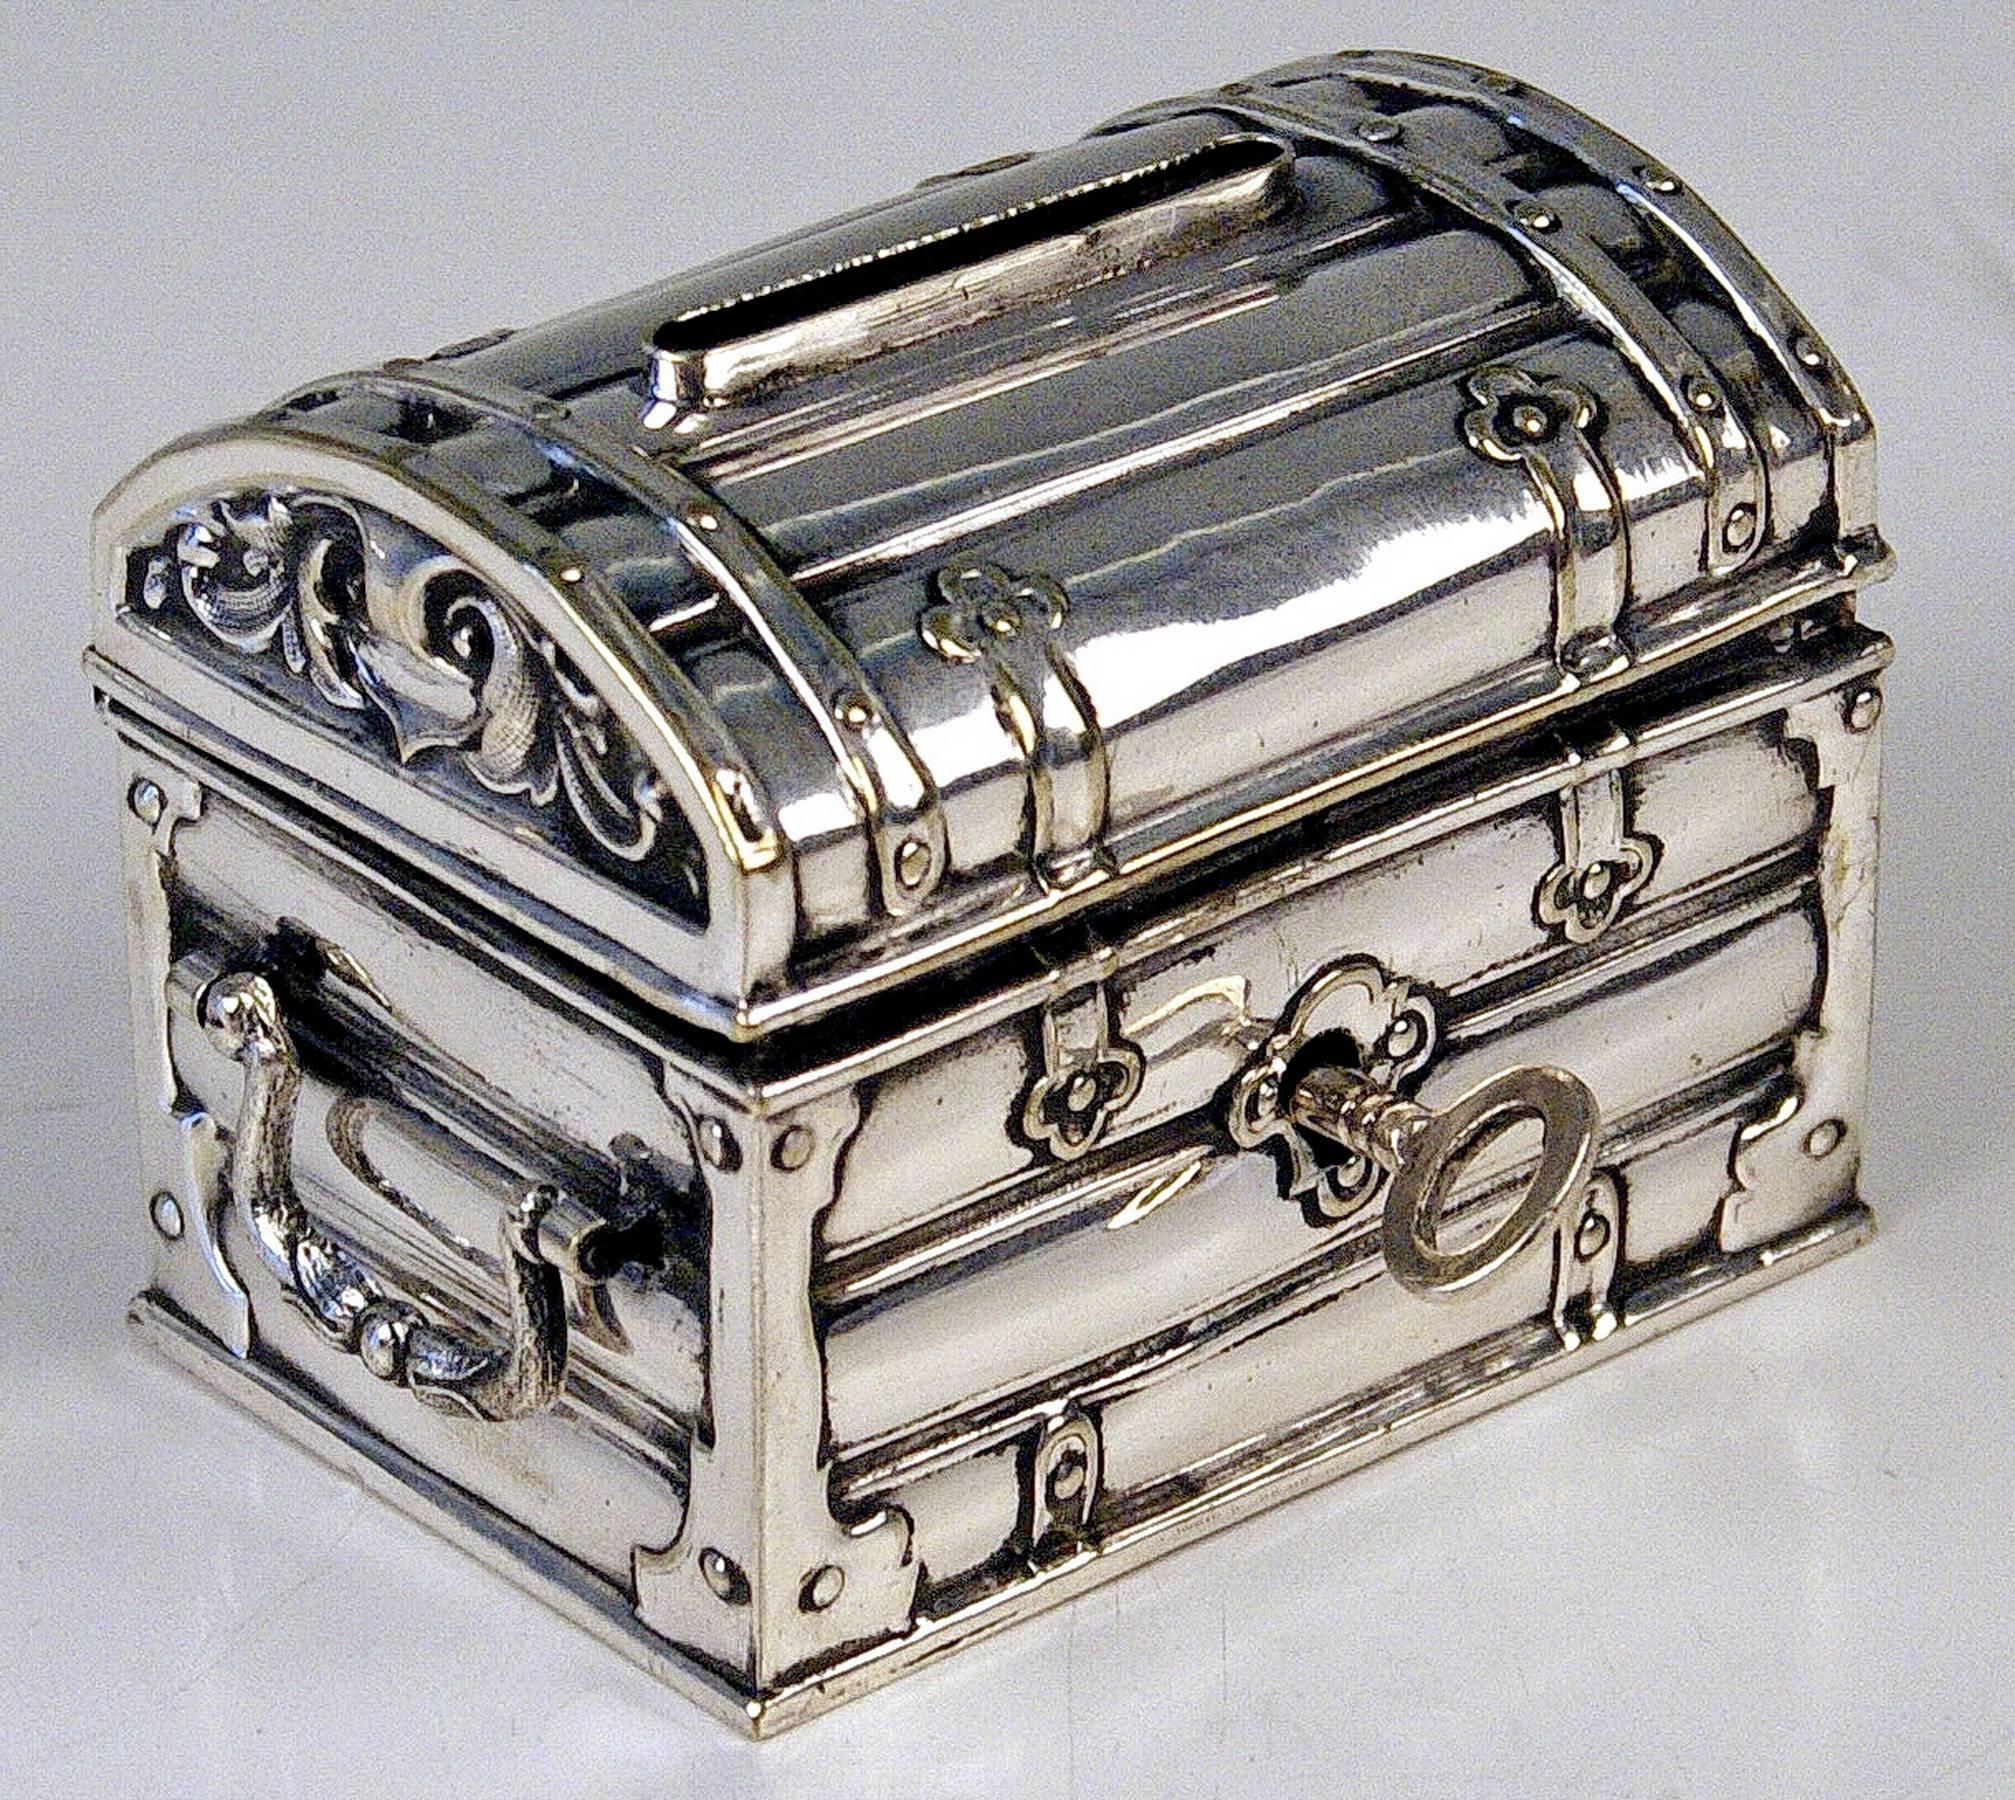 Austrian silver money box or piggy bank
manufactured during later 19th century period made circa 1880-1885.

Excellently made lidded money box (piggy bank) shaped as treasure chest having movable handles at lateral sides. Original key existing /